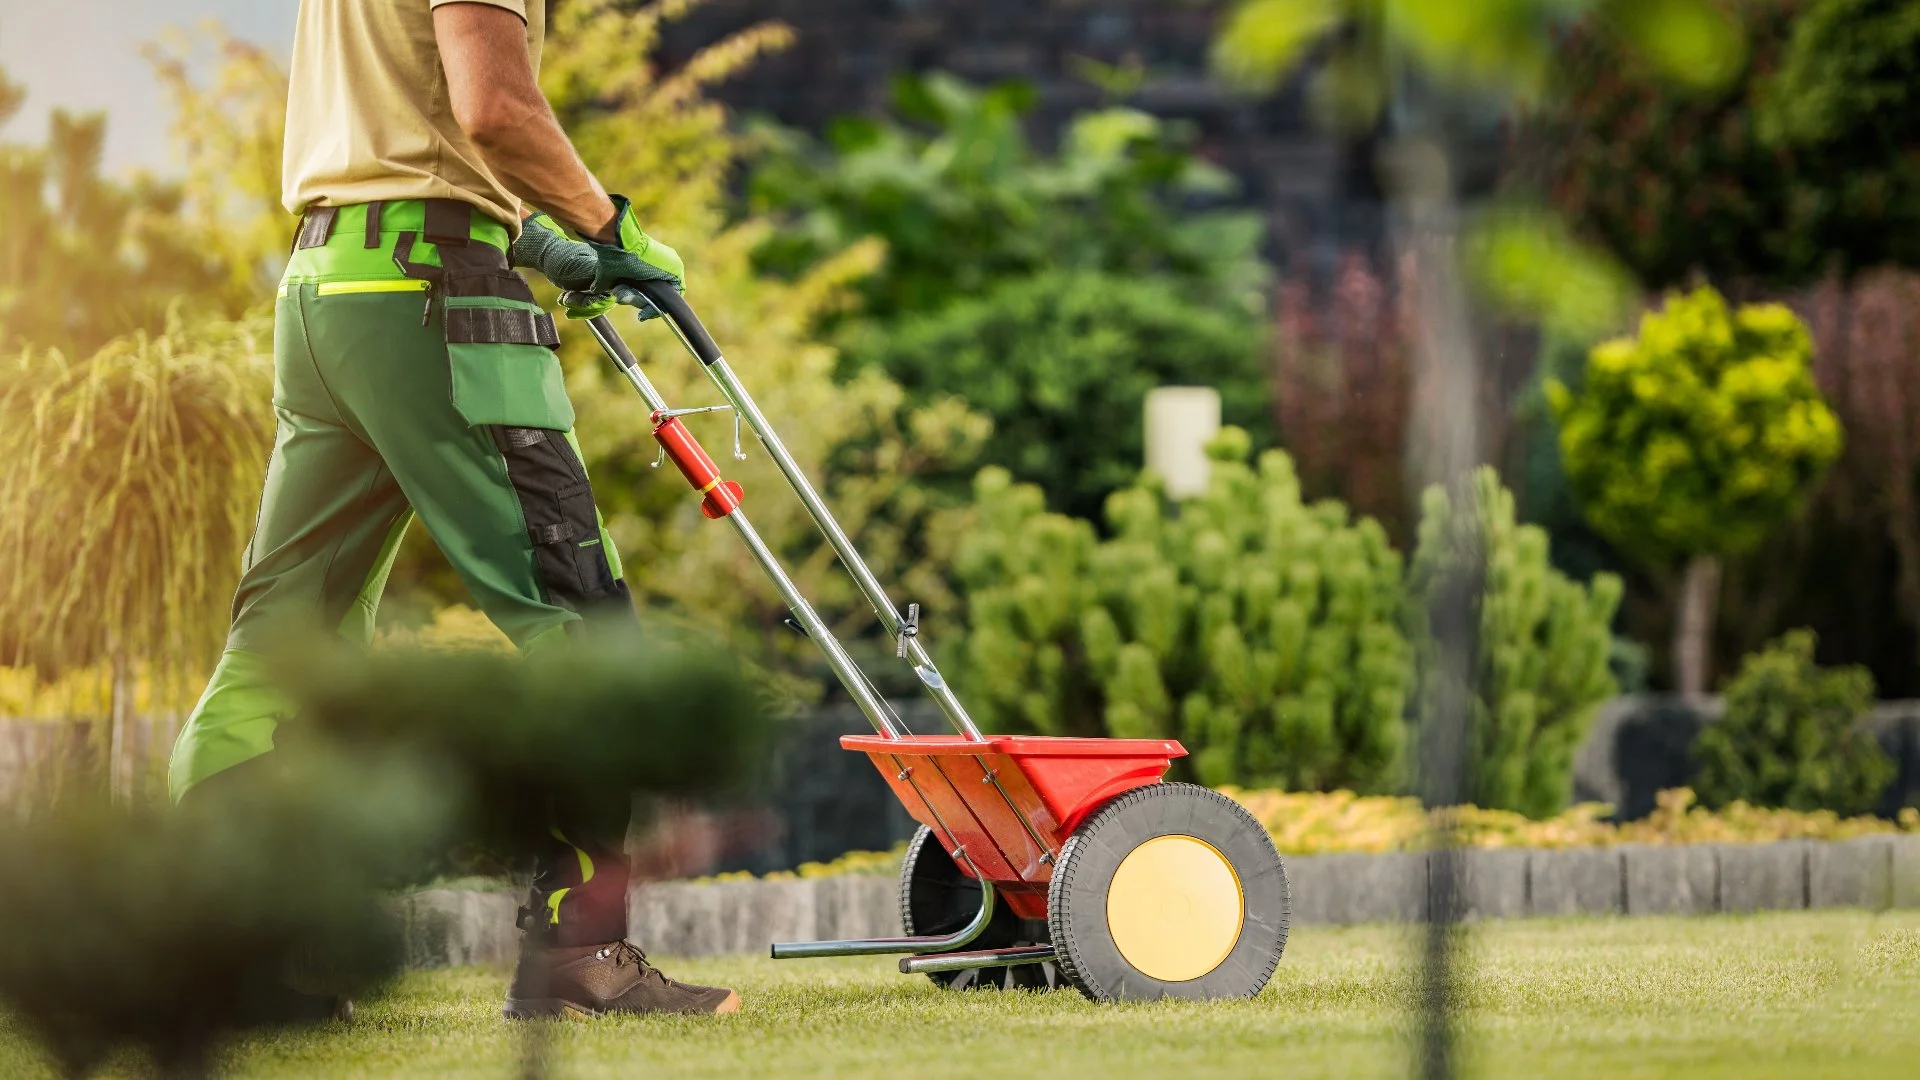 Make Sure to Invest in Fertilization Treatments for Your Lawn This Spring